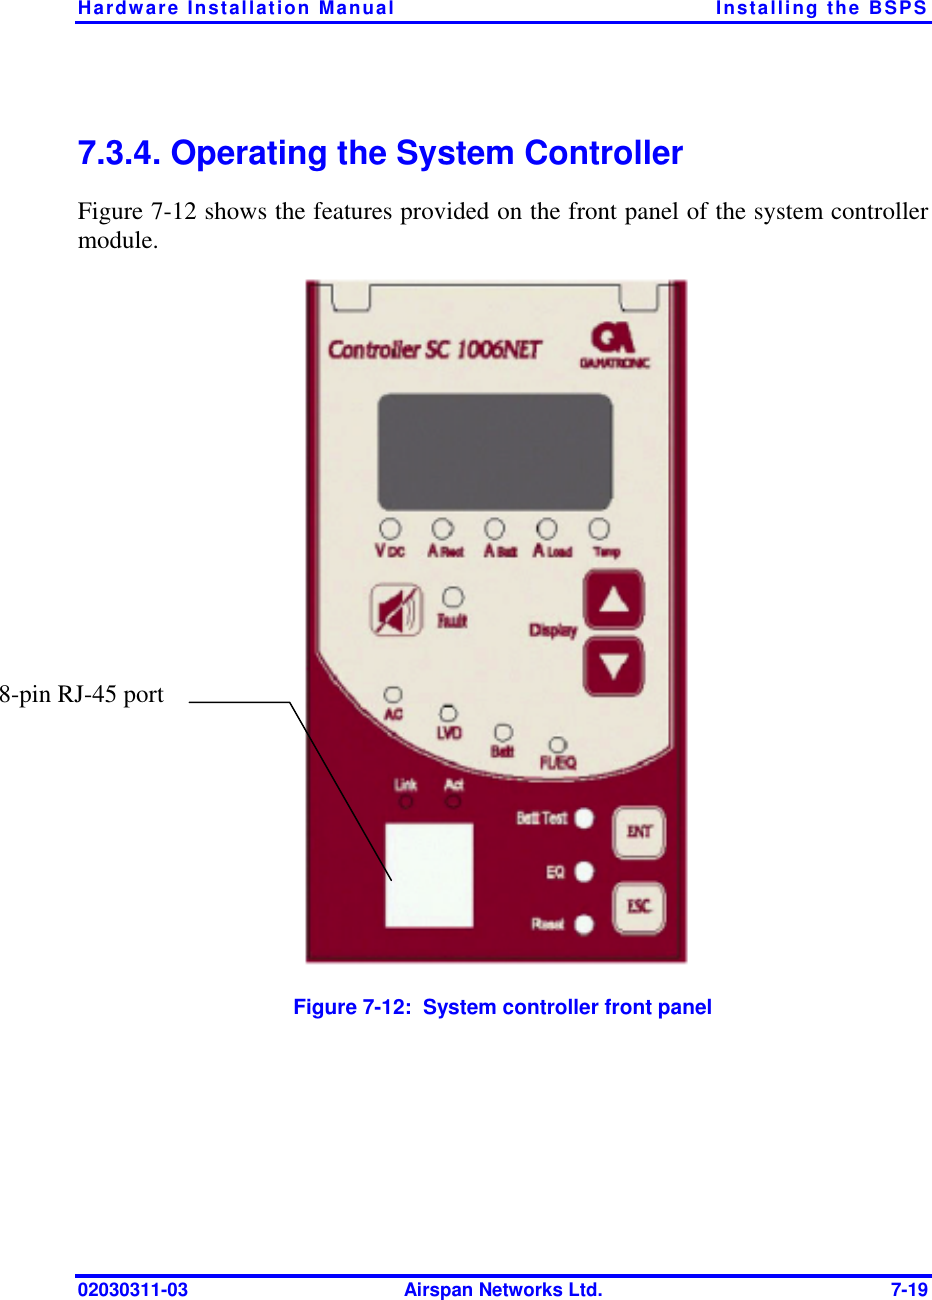 Hardware Installation Manual  Installing the BSPS 02030311-03  Airspan Networks Ltd.  7-19 7.3.4. Operating the System Controller Figure  7-12 shows the features provided on the front panel of the system controller module.  Figure  7-12:  System controller front panel 8-pin RJ-45 port 